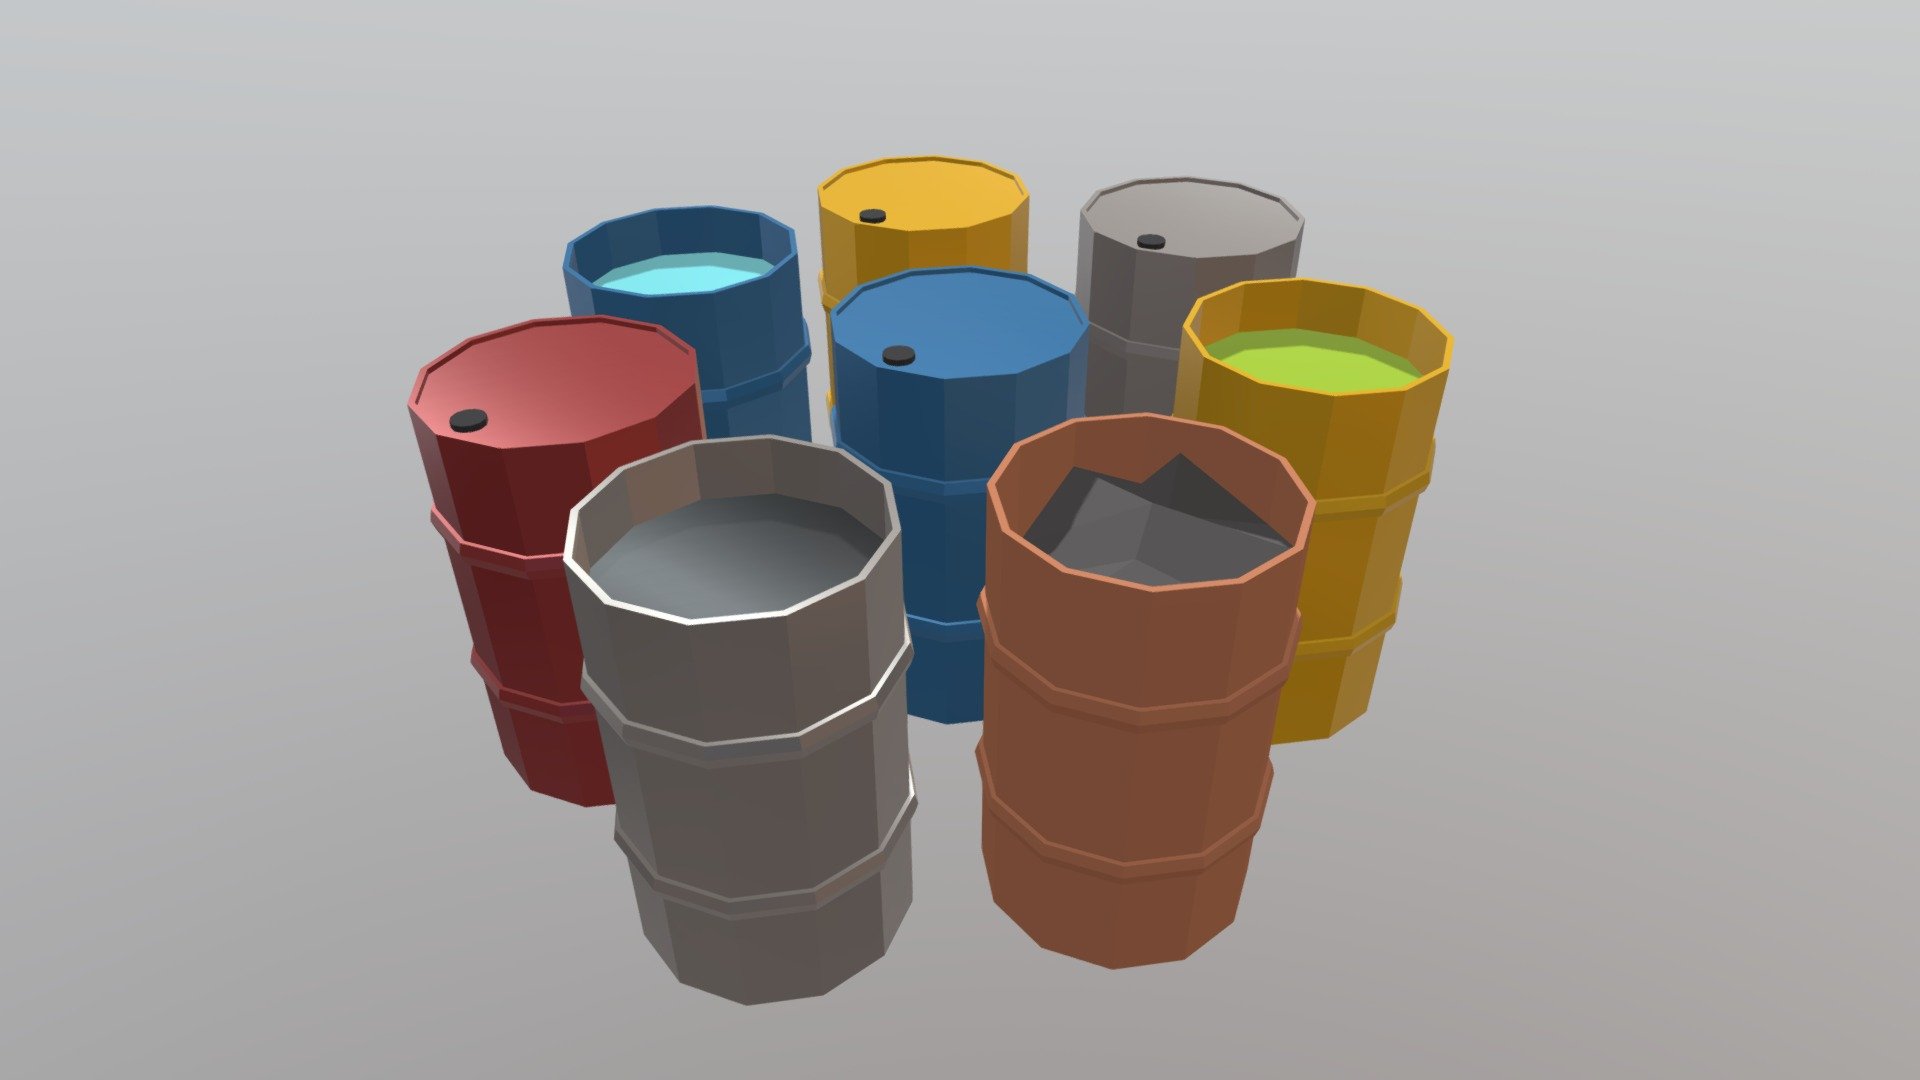 LP Barrel Lowpoly Cartoon Pack

Metal barrels of different types for your project
store water, garbage, toxic waste, oil products and other explosive components in them.
burn trash in them.
Perfect for cartoon lowpoly projects.
content:
- open barrel of water
- closed barrel of water
- open barrel with toxic waste
- closed barrel with toxic waste
- open barrel with oil products
- closed barrel with oil products
-explosive red barrel dangerous
- a barrel for burning garbage 3d model